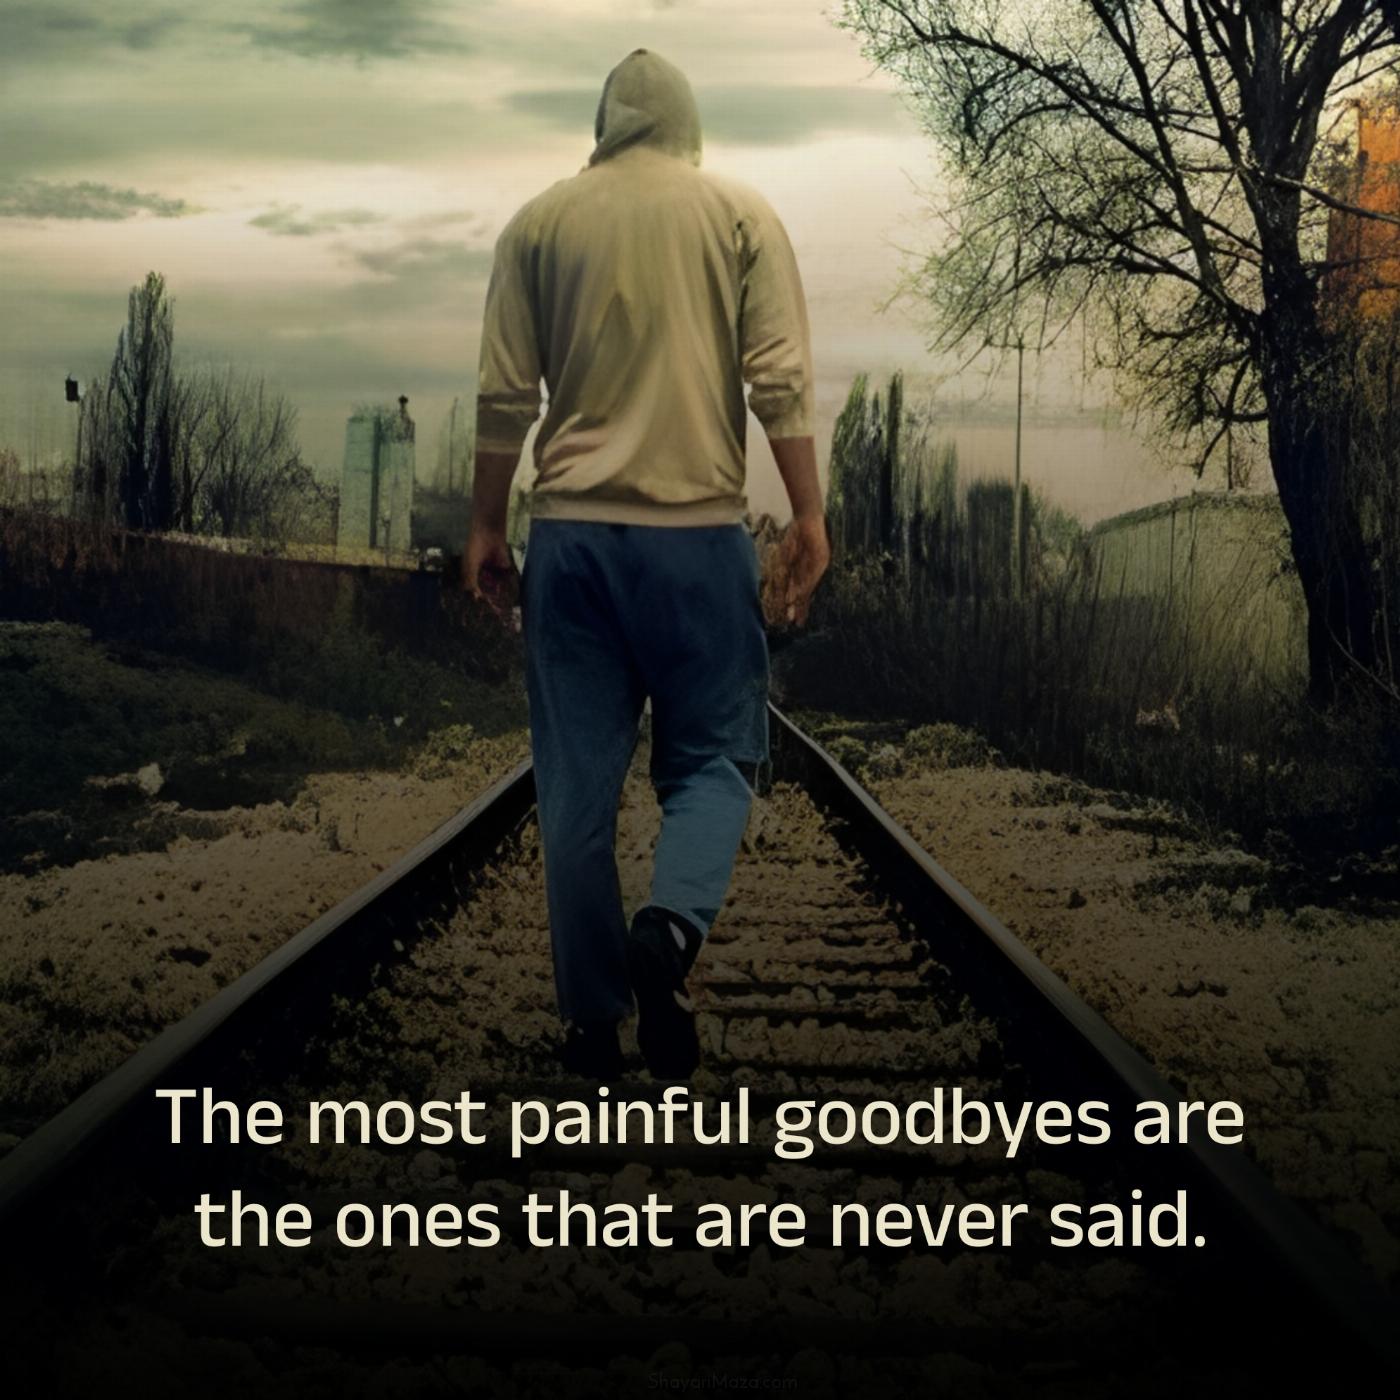 The most painful goodbyes are the ones that are never said